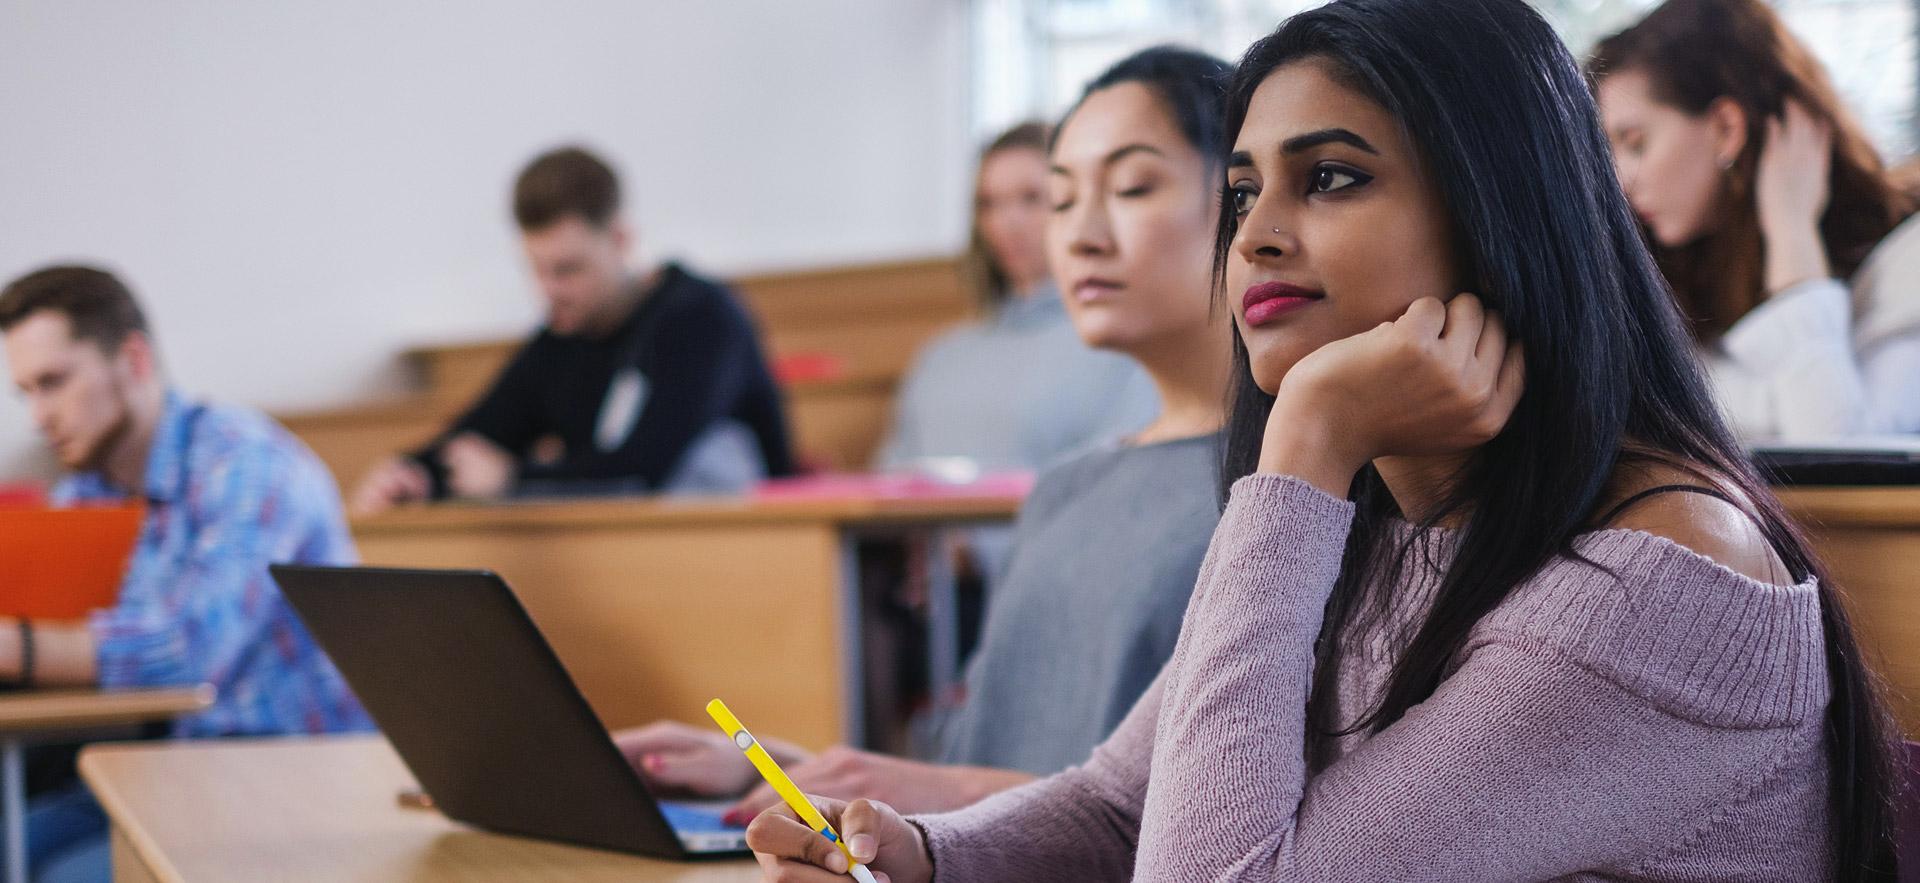 Female student listening in class.